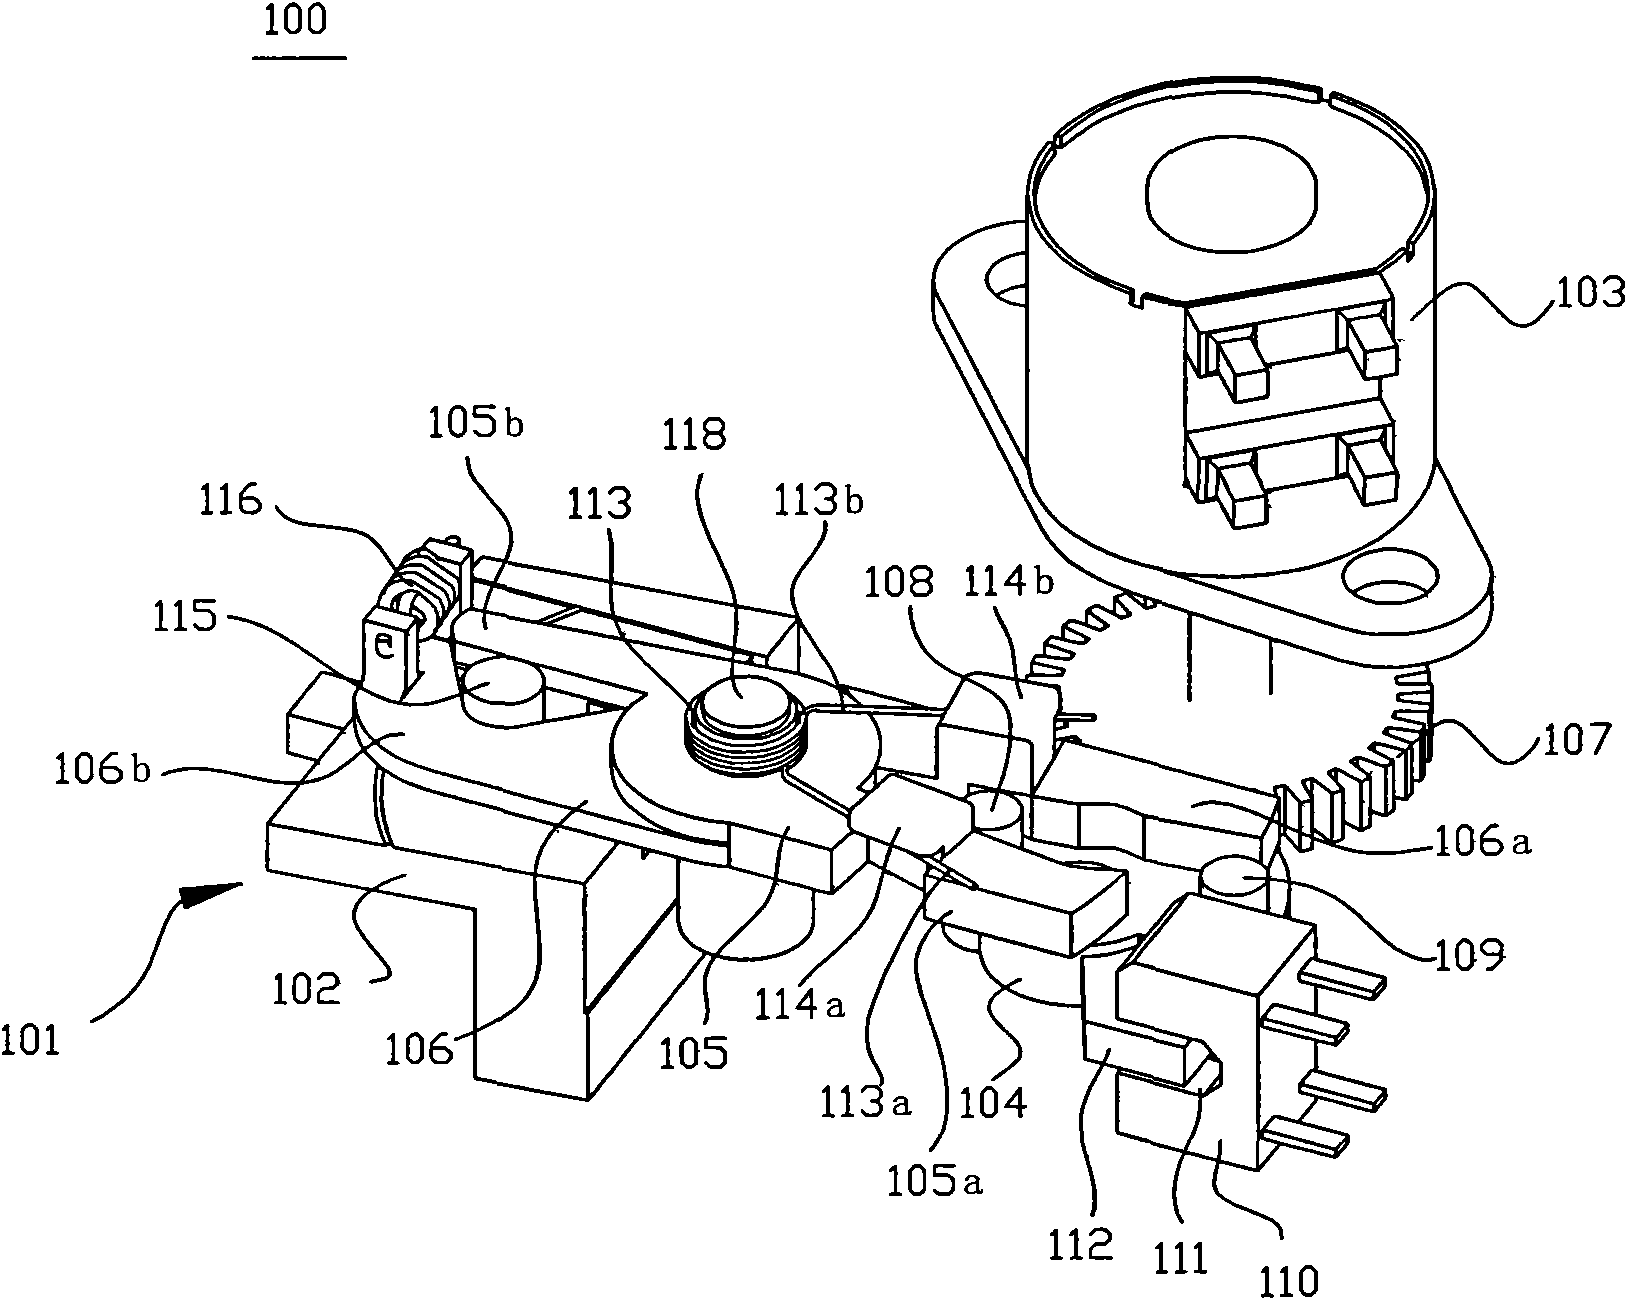 Positioning mechanism of photosensitive unit of hand vibration preventing photography device